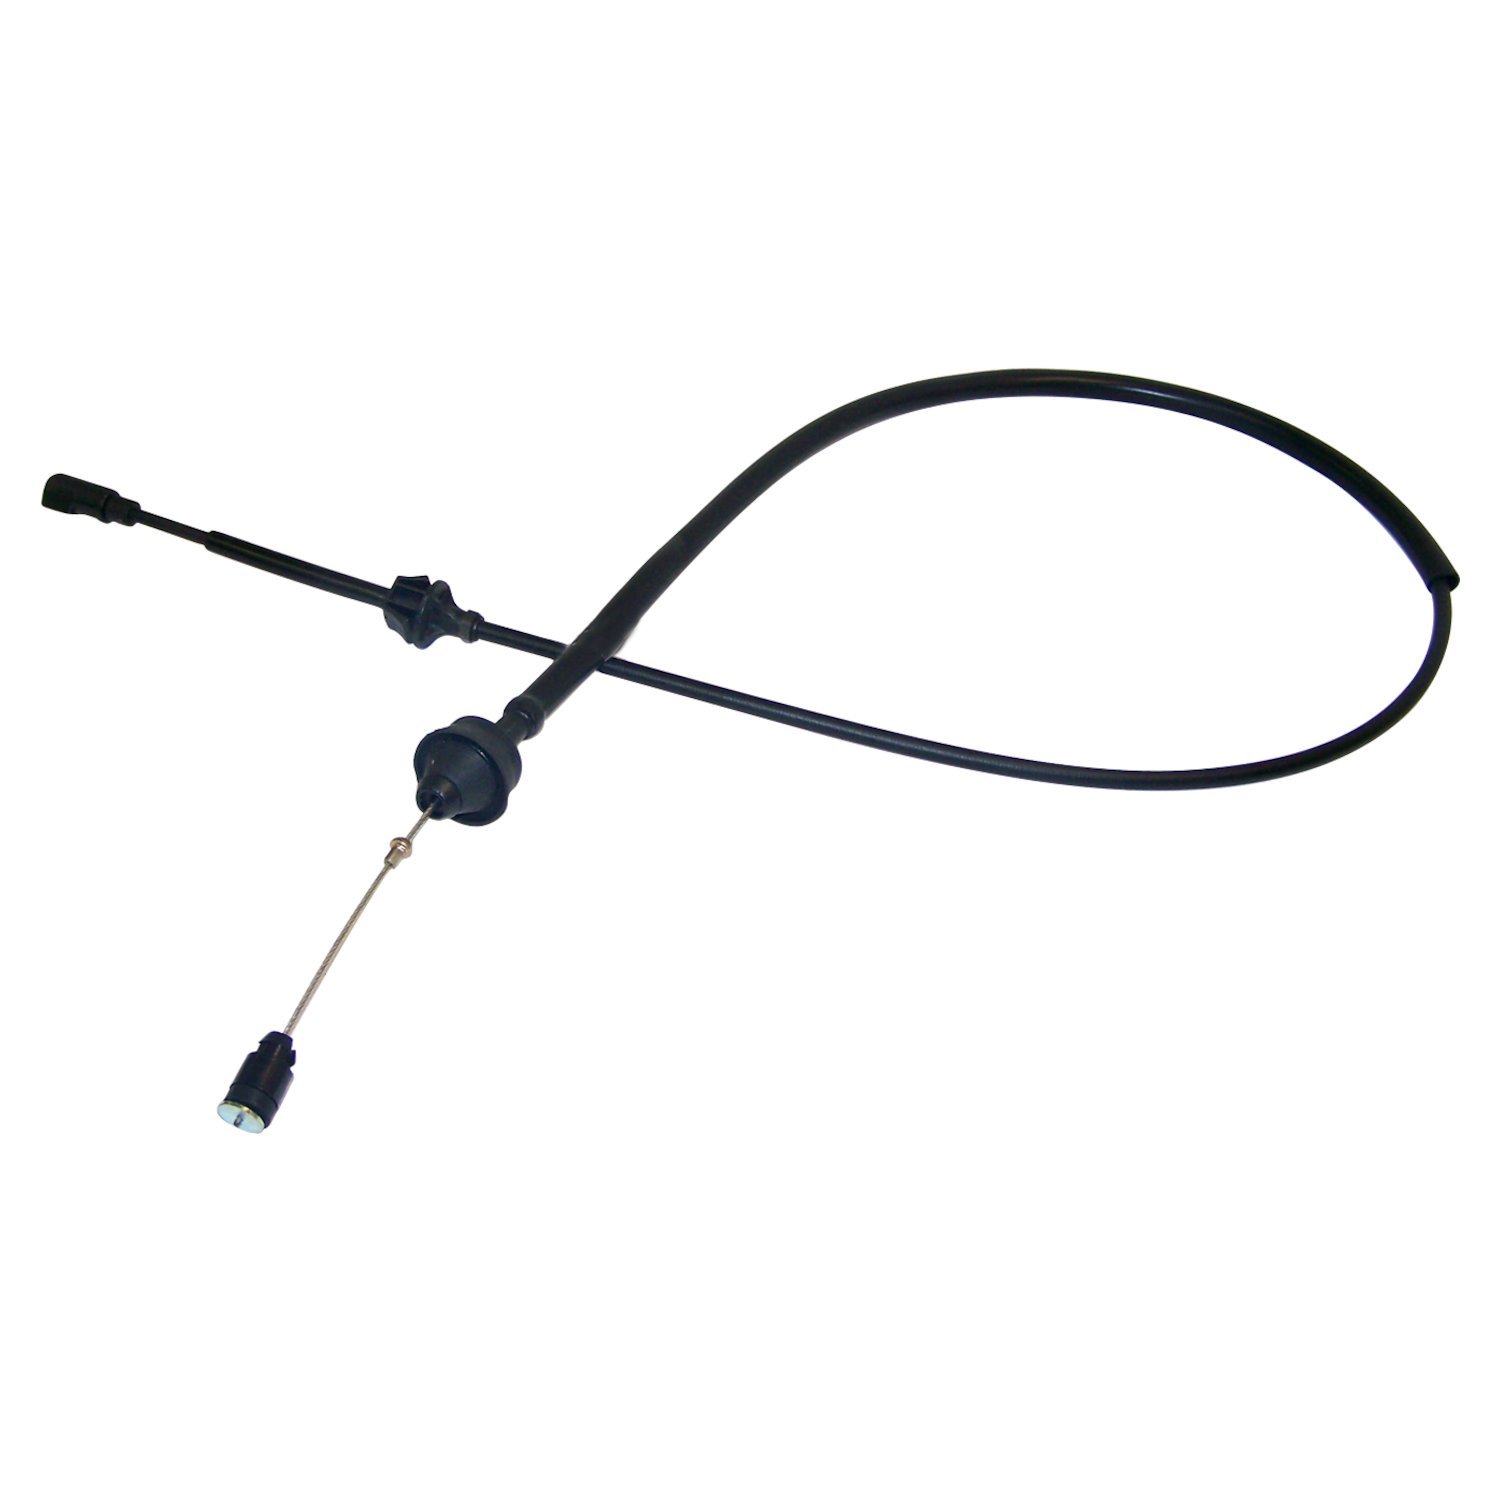 Accelerator Cable for 99-04 Jeep WJ, WG Grand Cherokee w/ 4.0L Engine